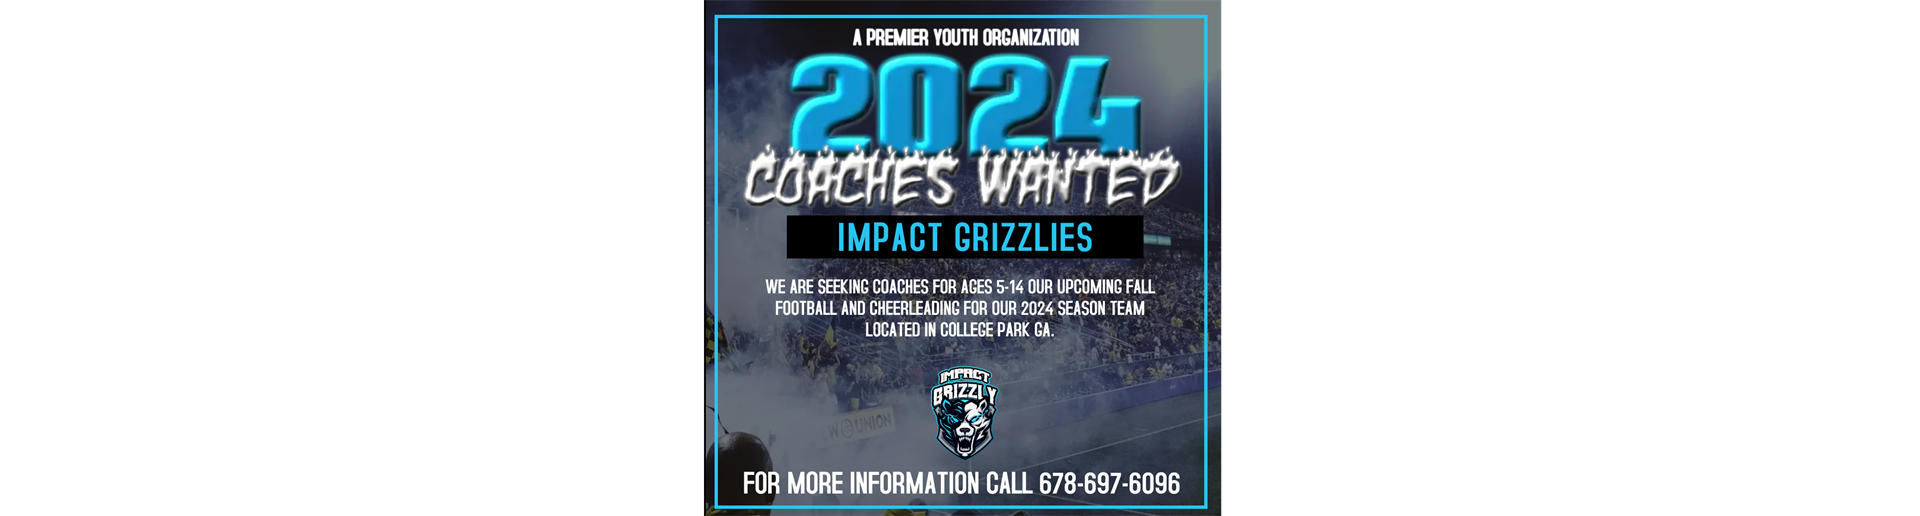 JOIN THE IMPACT GRIZZLIES!!!